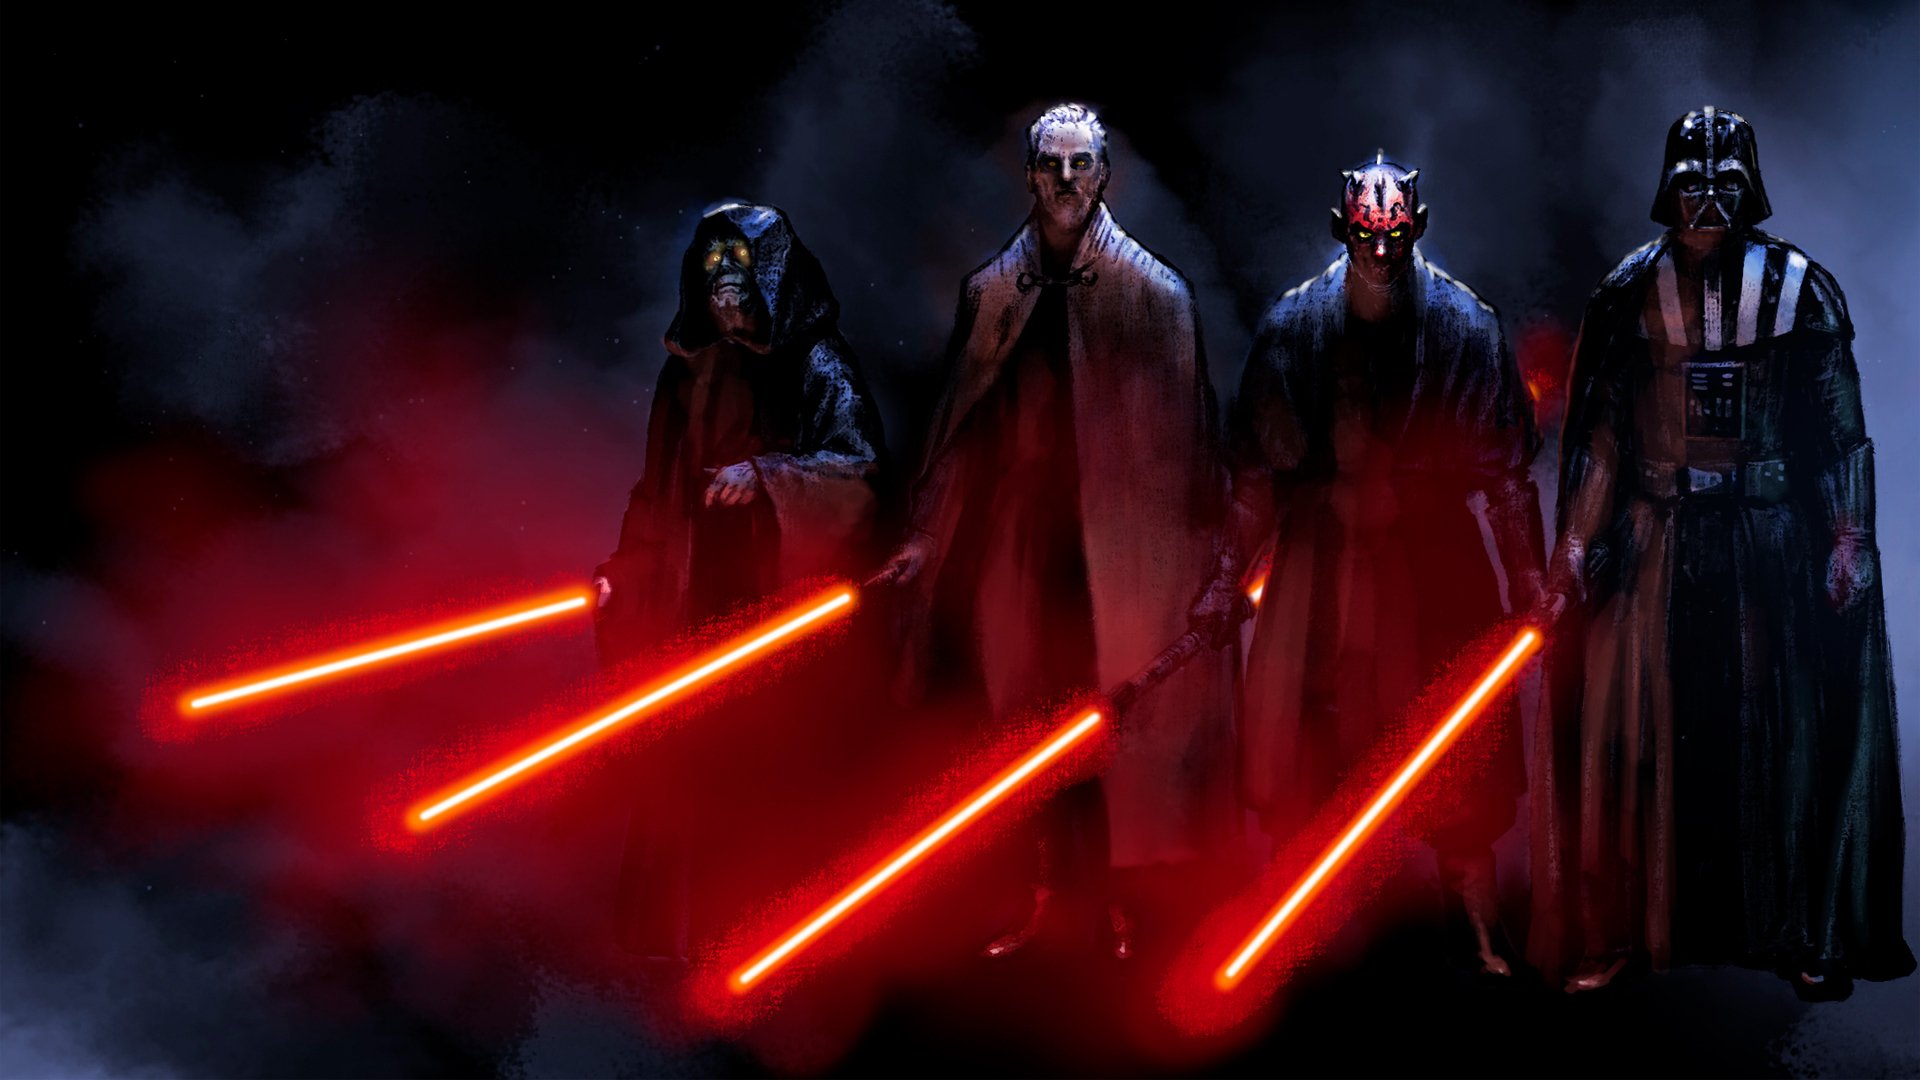 Who are the members of the Sith Order in Star Wars?